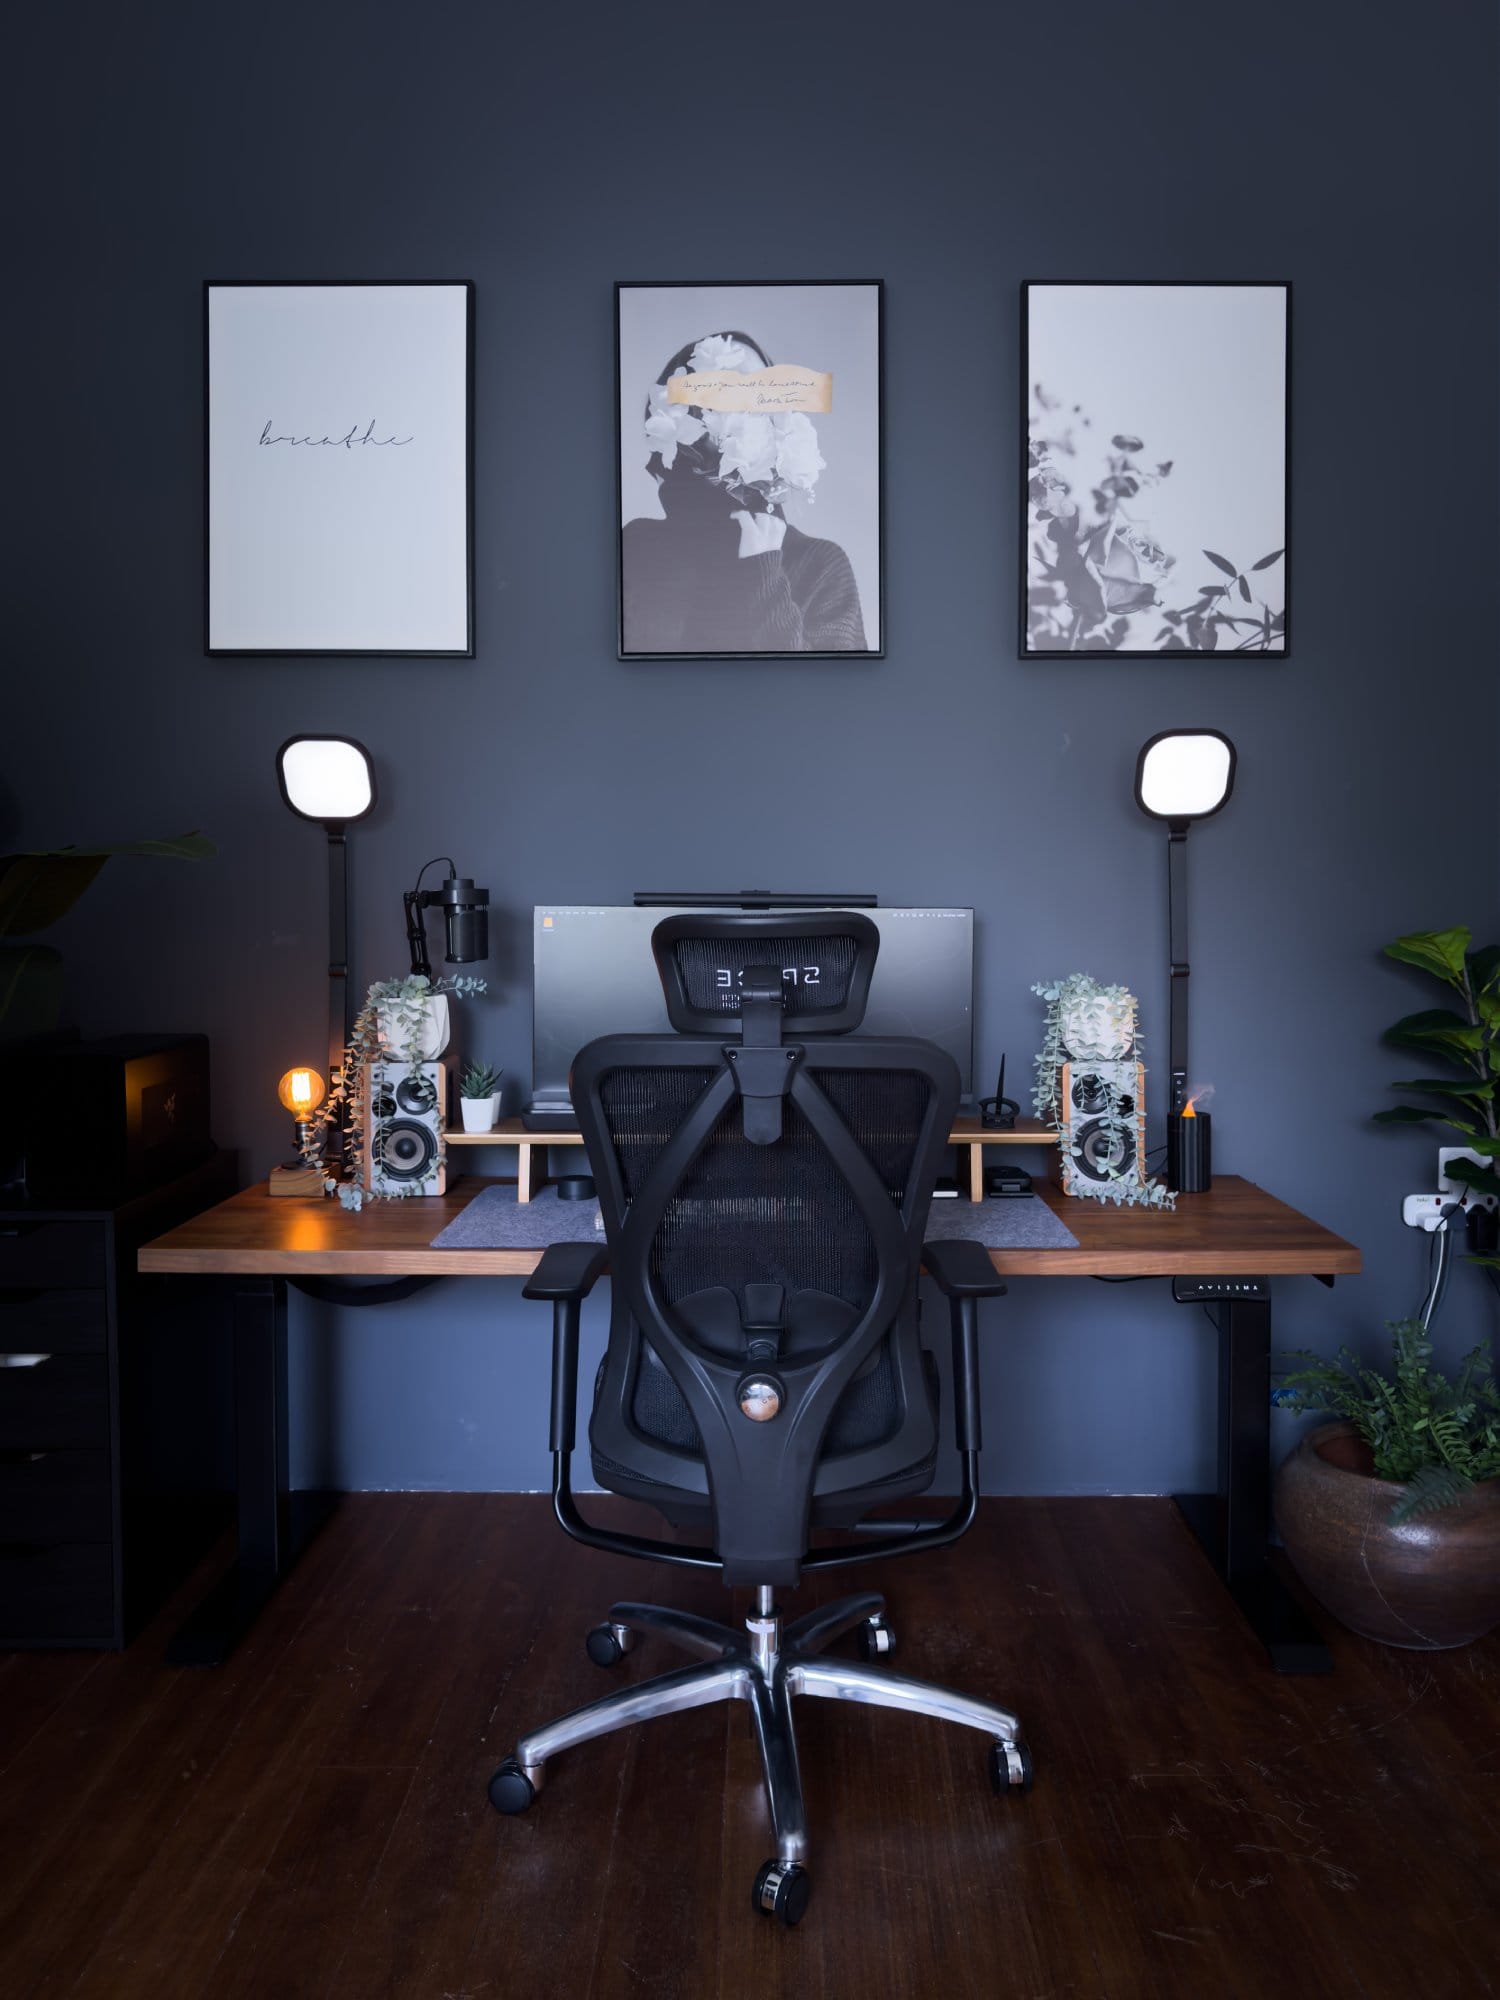 A clean and organised home office featuring an LG 34WK650 monitor, SPACE Ergonomic Seat Pro chair, and Switch Couture Frosted Acrylic Alice keyboard, with Edifier R1280T speakers, framed artwork, and warm ambient lighting